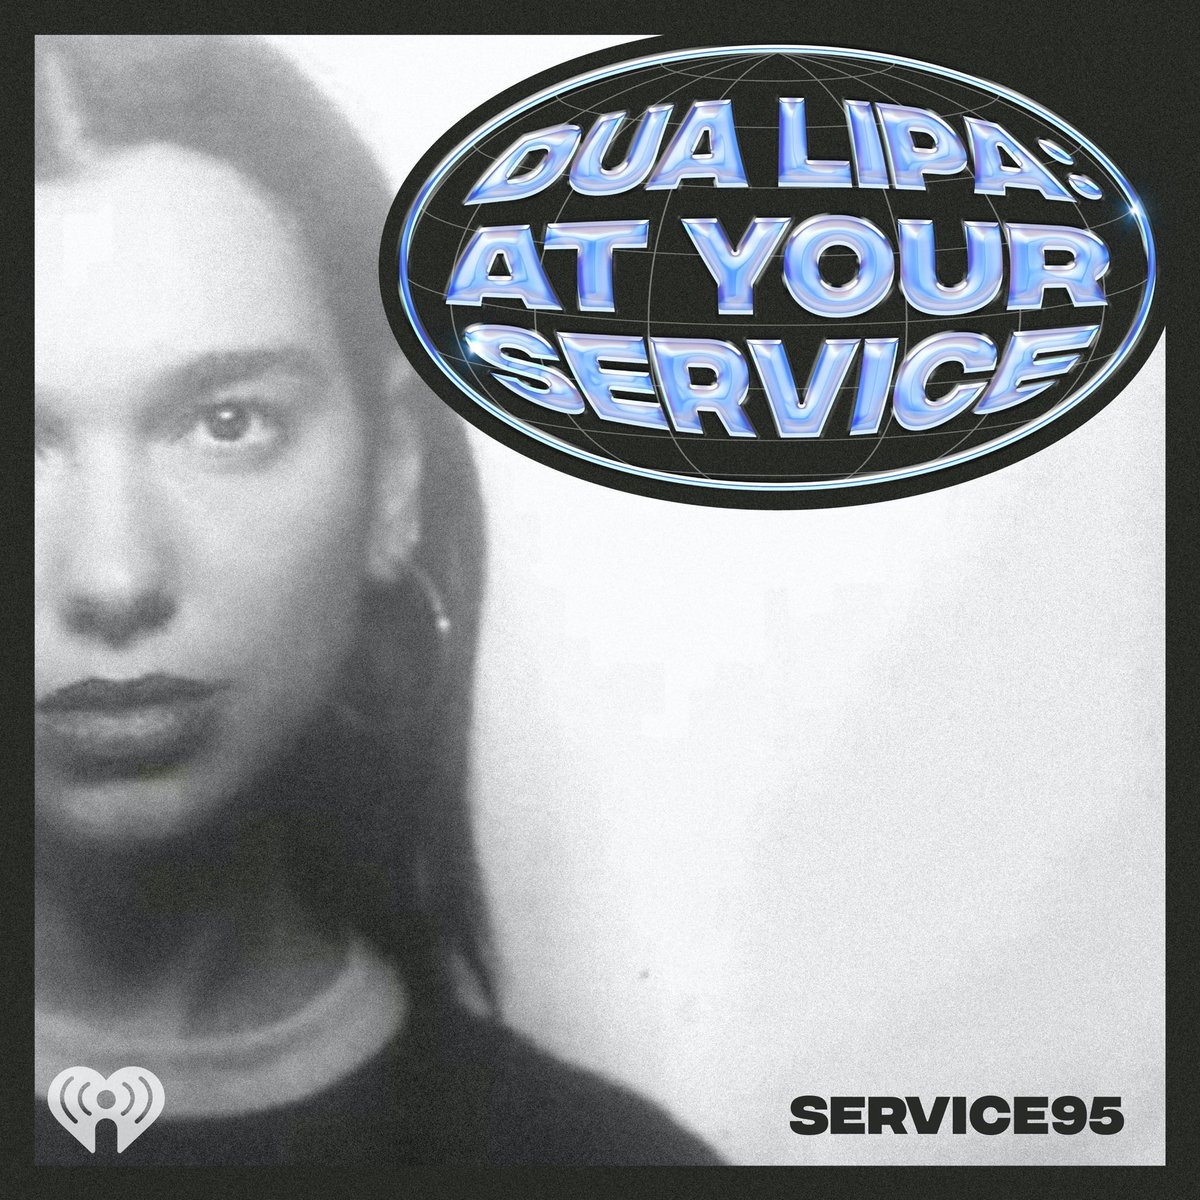 🎙 | Episode #002 of At Your Service is out now! @lisadtaddeo talks to @DUALIPA about feminism, the female desire, her insider tips on NYC + more!

Listen: link.chtbl.com/Dua_Lipa_At_Yo…